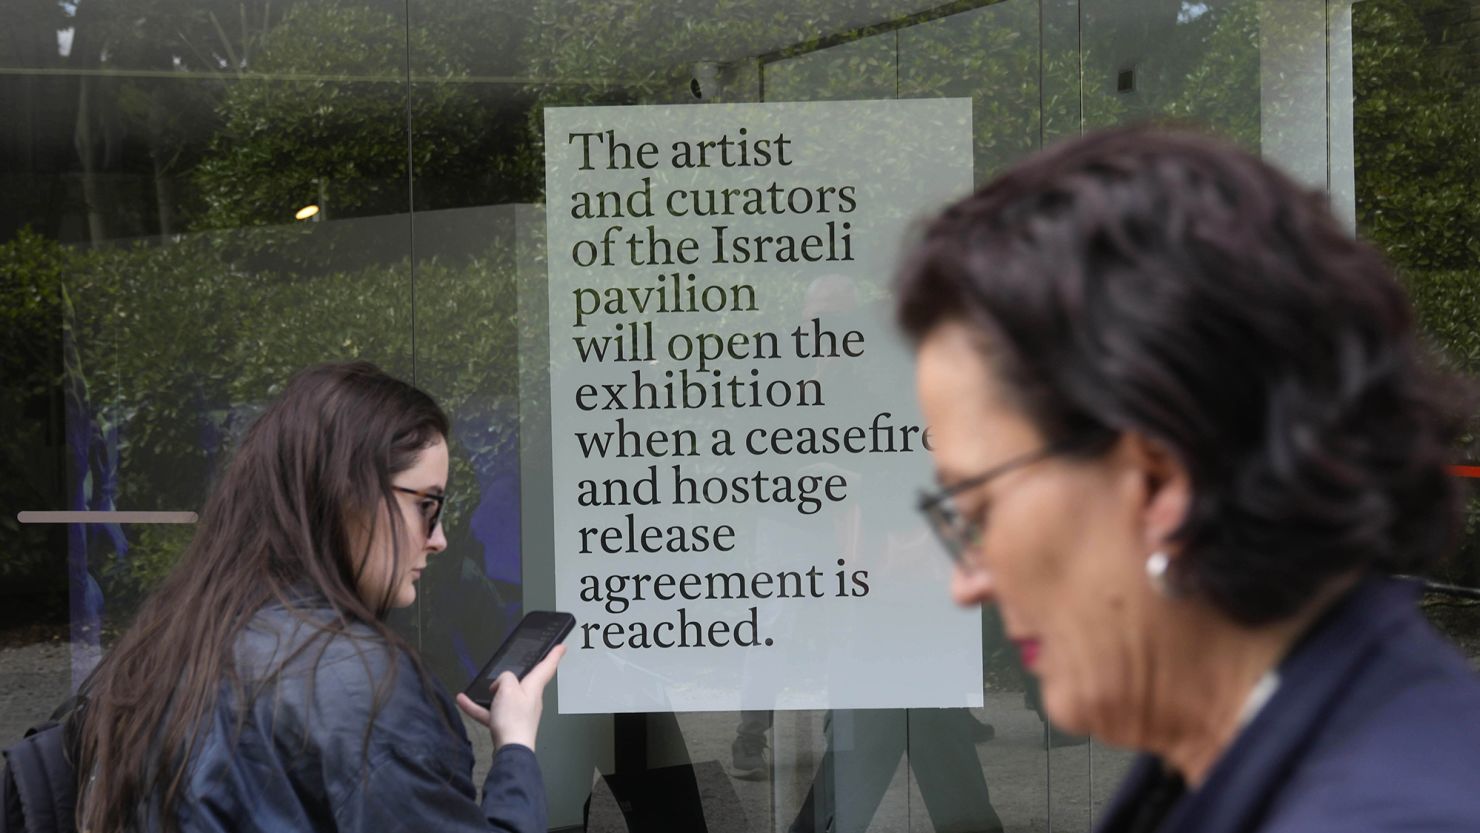 The artist who manages the exhibition hall of the Israeli Venice Biennale said that she would not open the exhibition hall until the hostage agreement and the Gaza ceasefire agreement were reached.